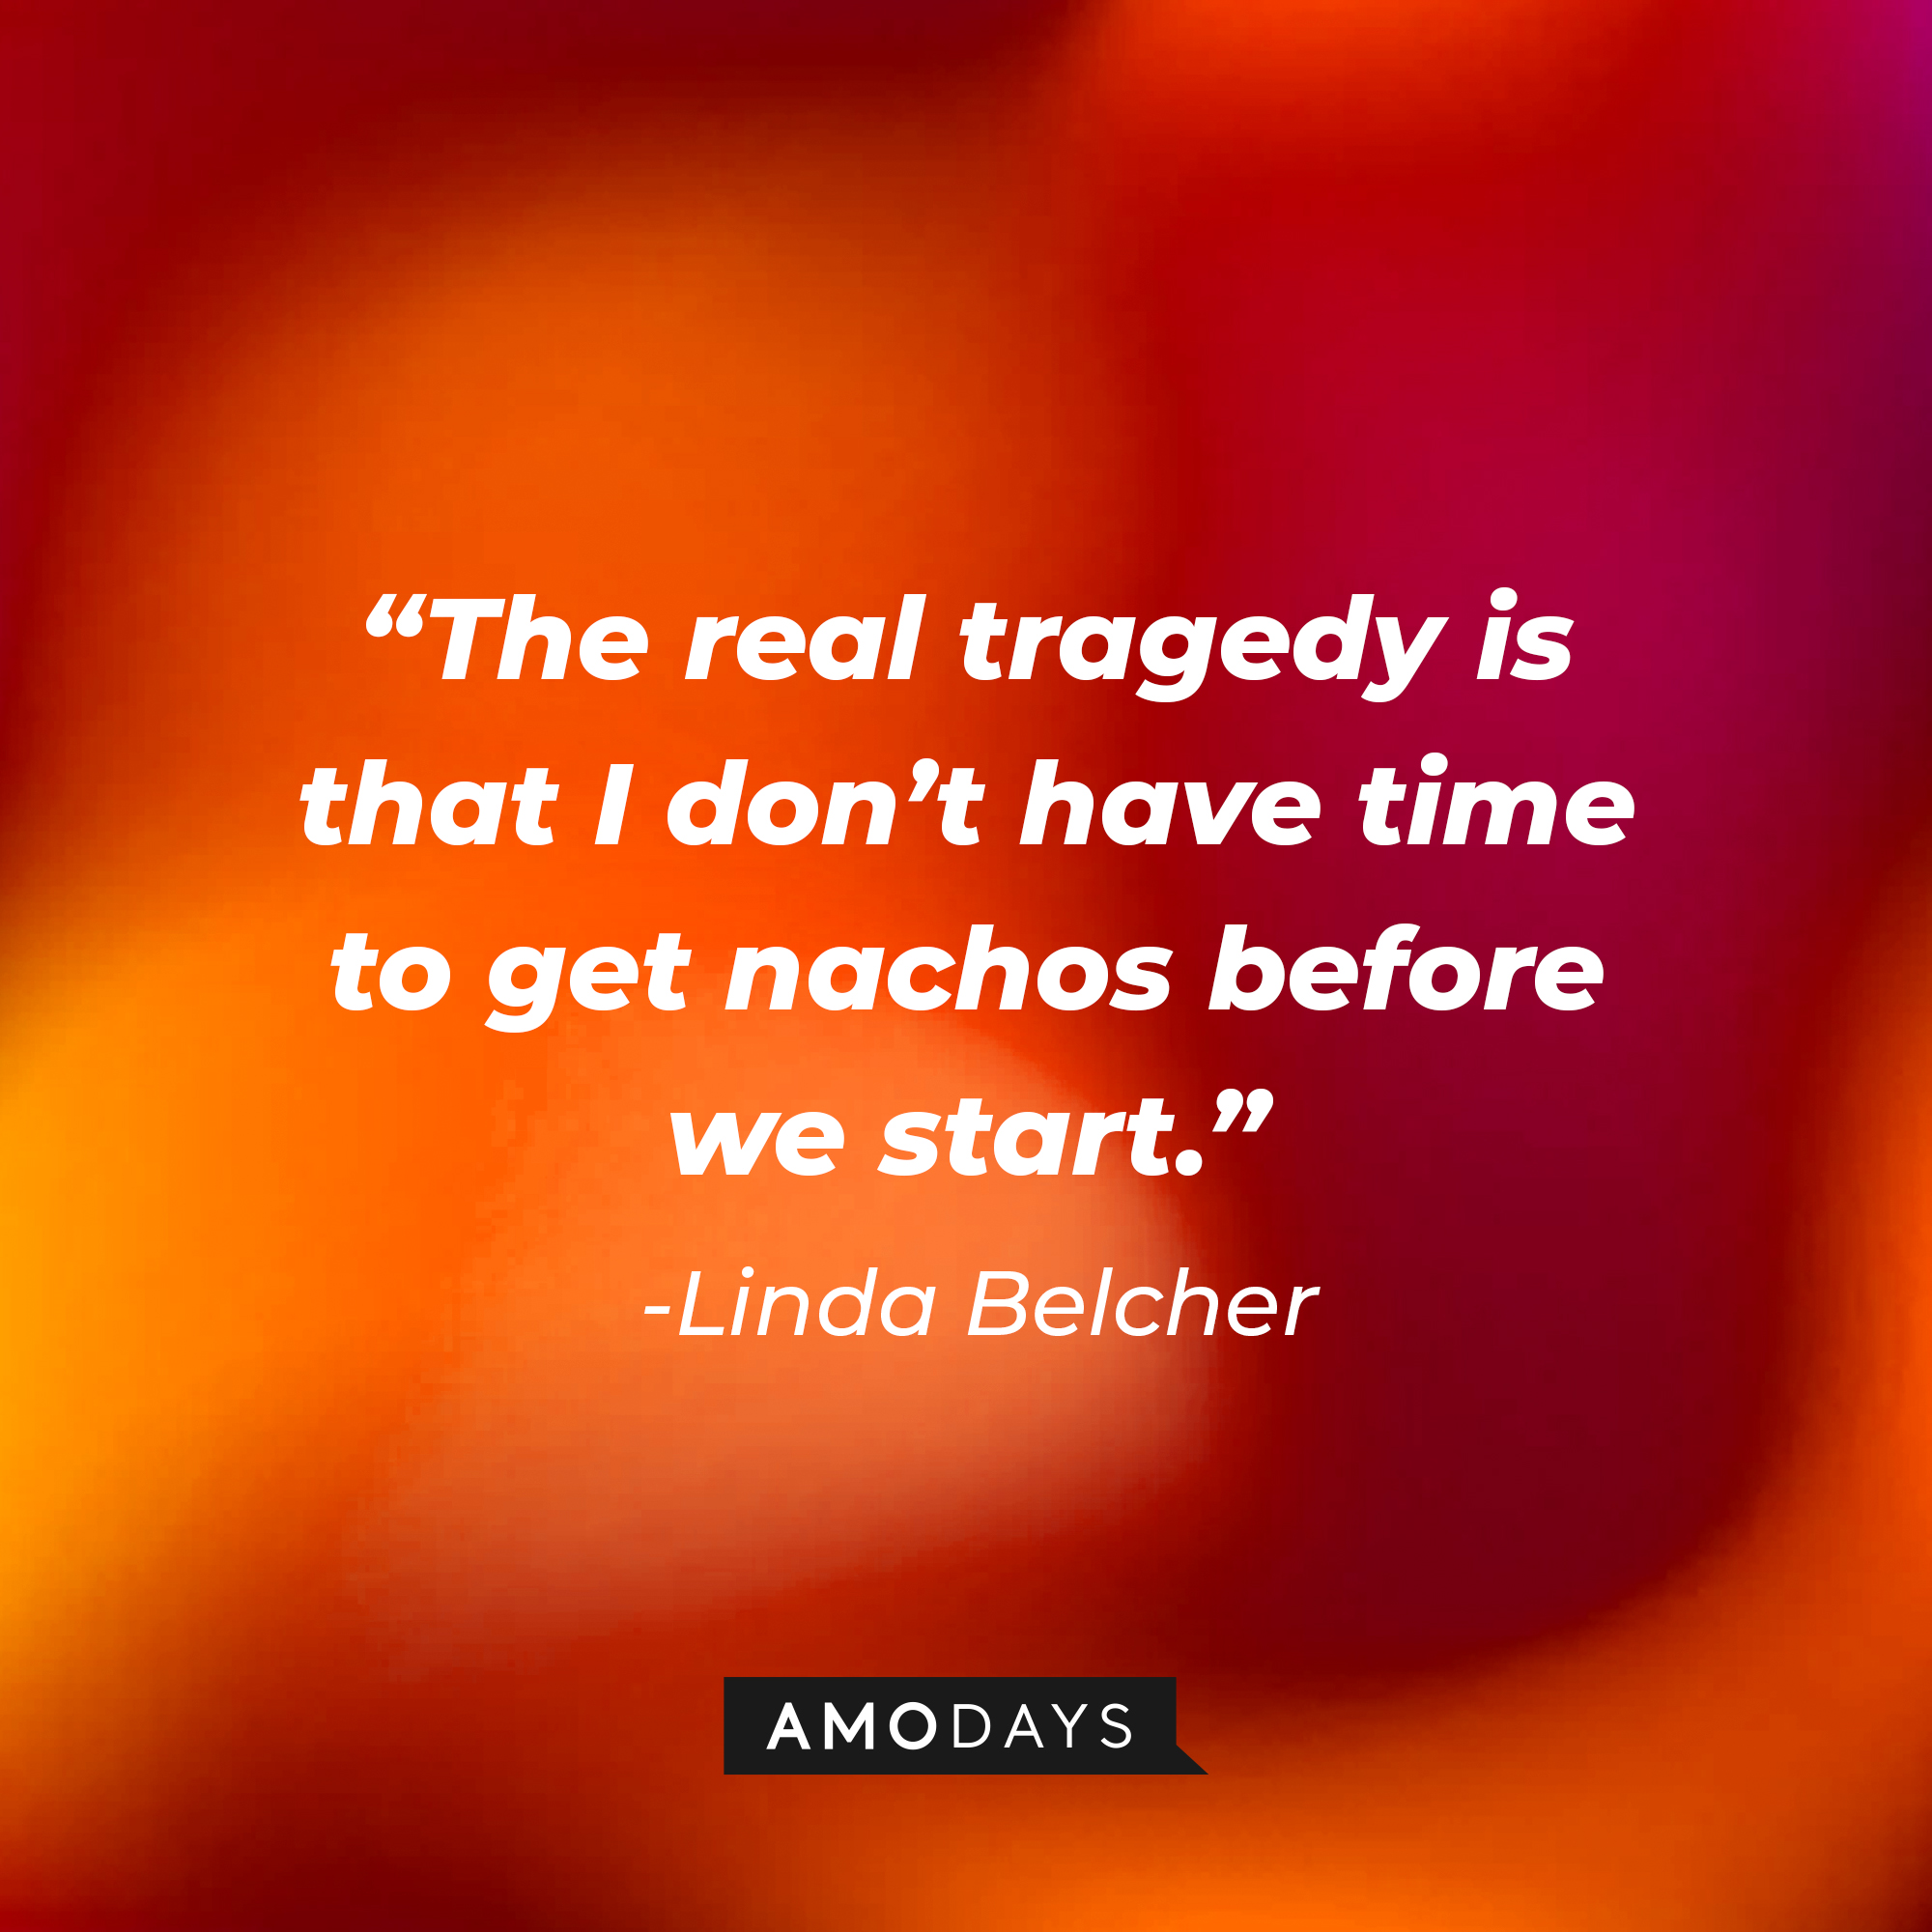 Linda Belcher’s quote: “The real tragedy is that I don’t have time to get nachos before we start.” | Source: AmoDays